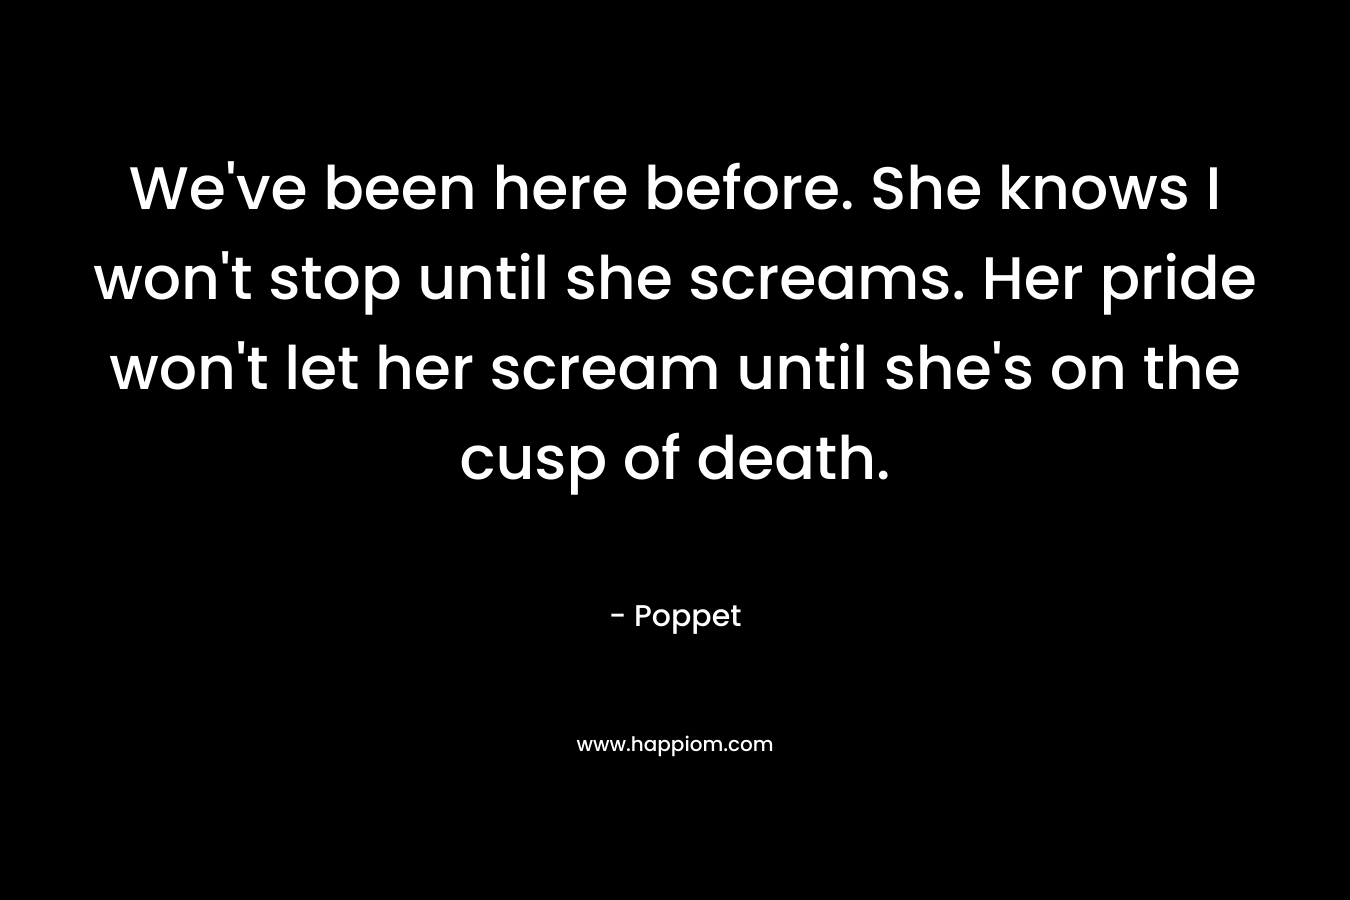 We’ve been here before. She knows I won’t stop until she screams. Her pride won’t let her scream until she’s on the cusp of death. – Poppet